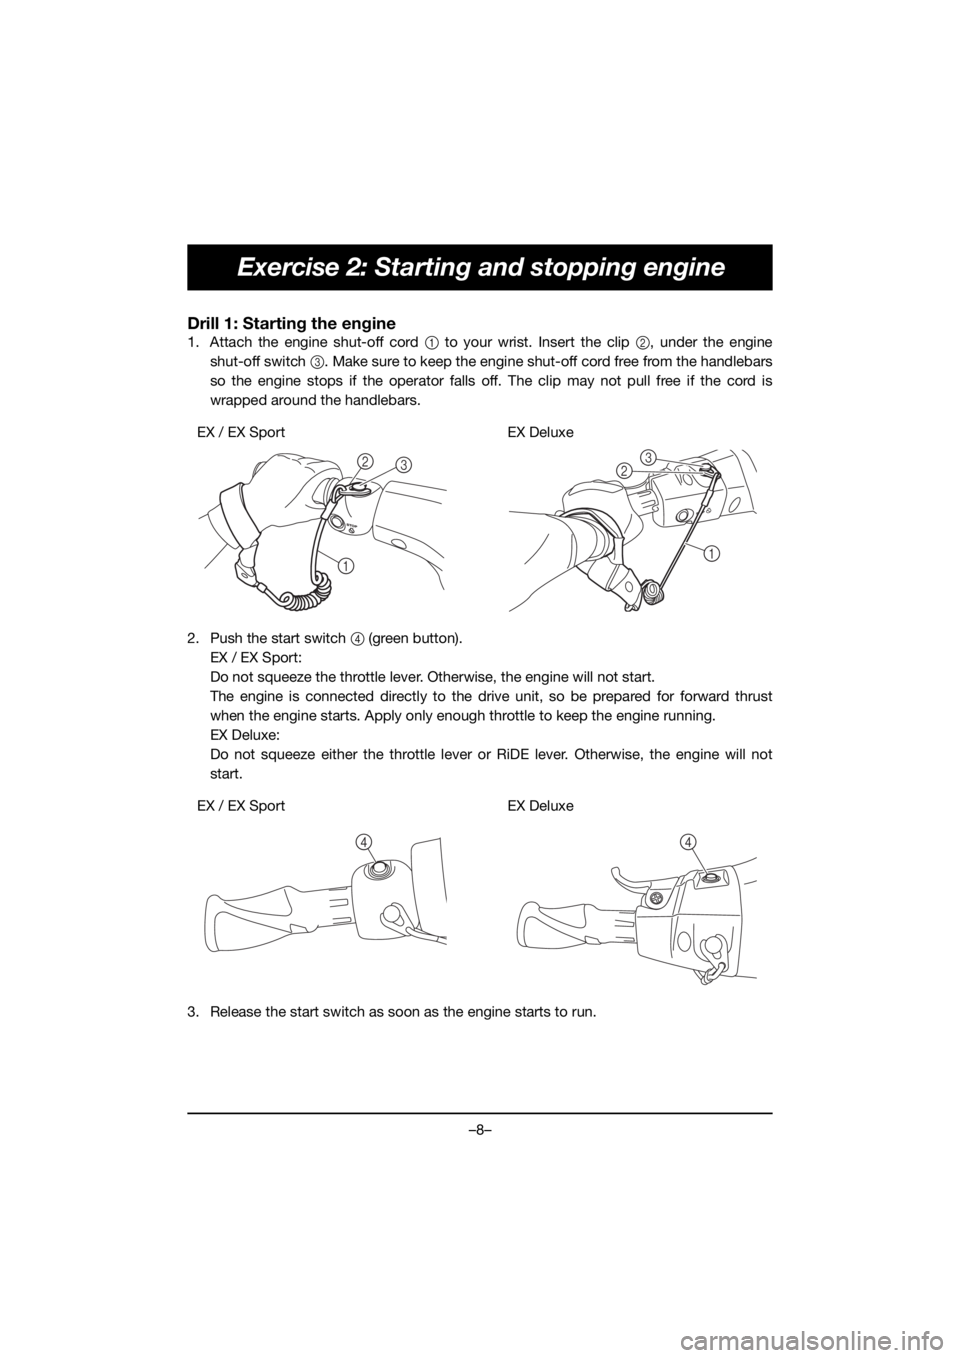 YAMAHA EX 2019  Manual de utilização (in Portuguese) –8–
Exercise 2: Starting and stopping engine
Drill 1: Starting the engine
1. Attach the engine shut-off cord 1 to your wrist. Insert the clip 2, under the engine
shut-off switch 3. Make sure to ke